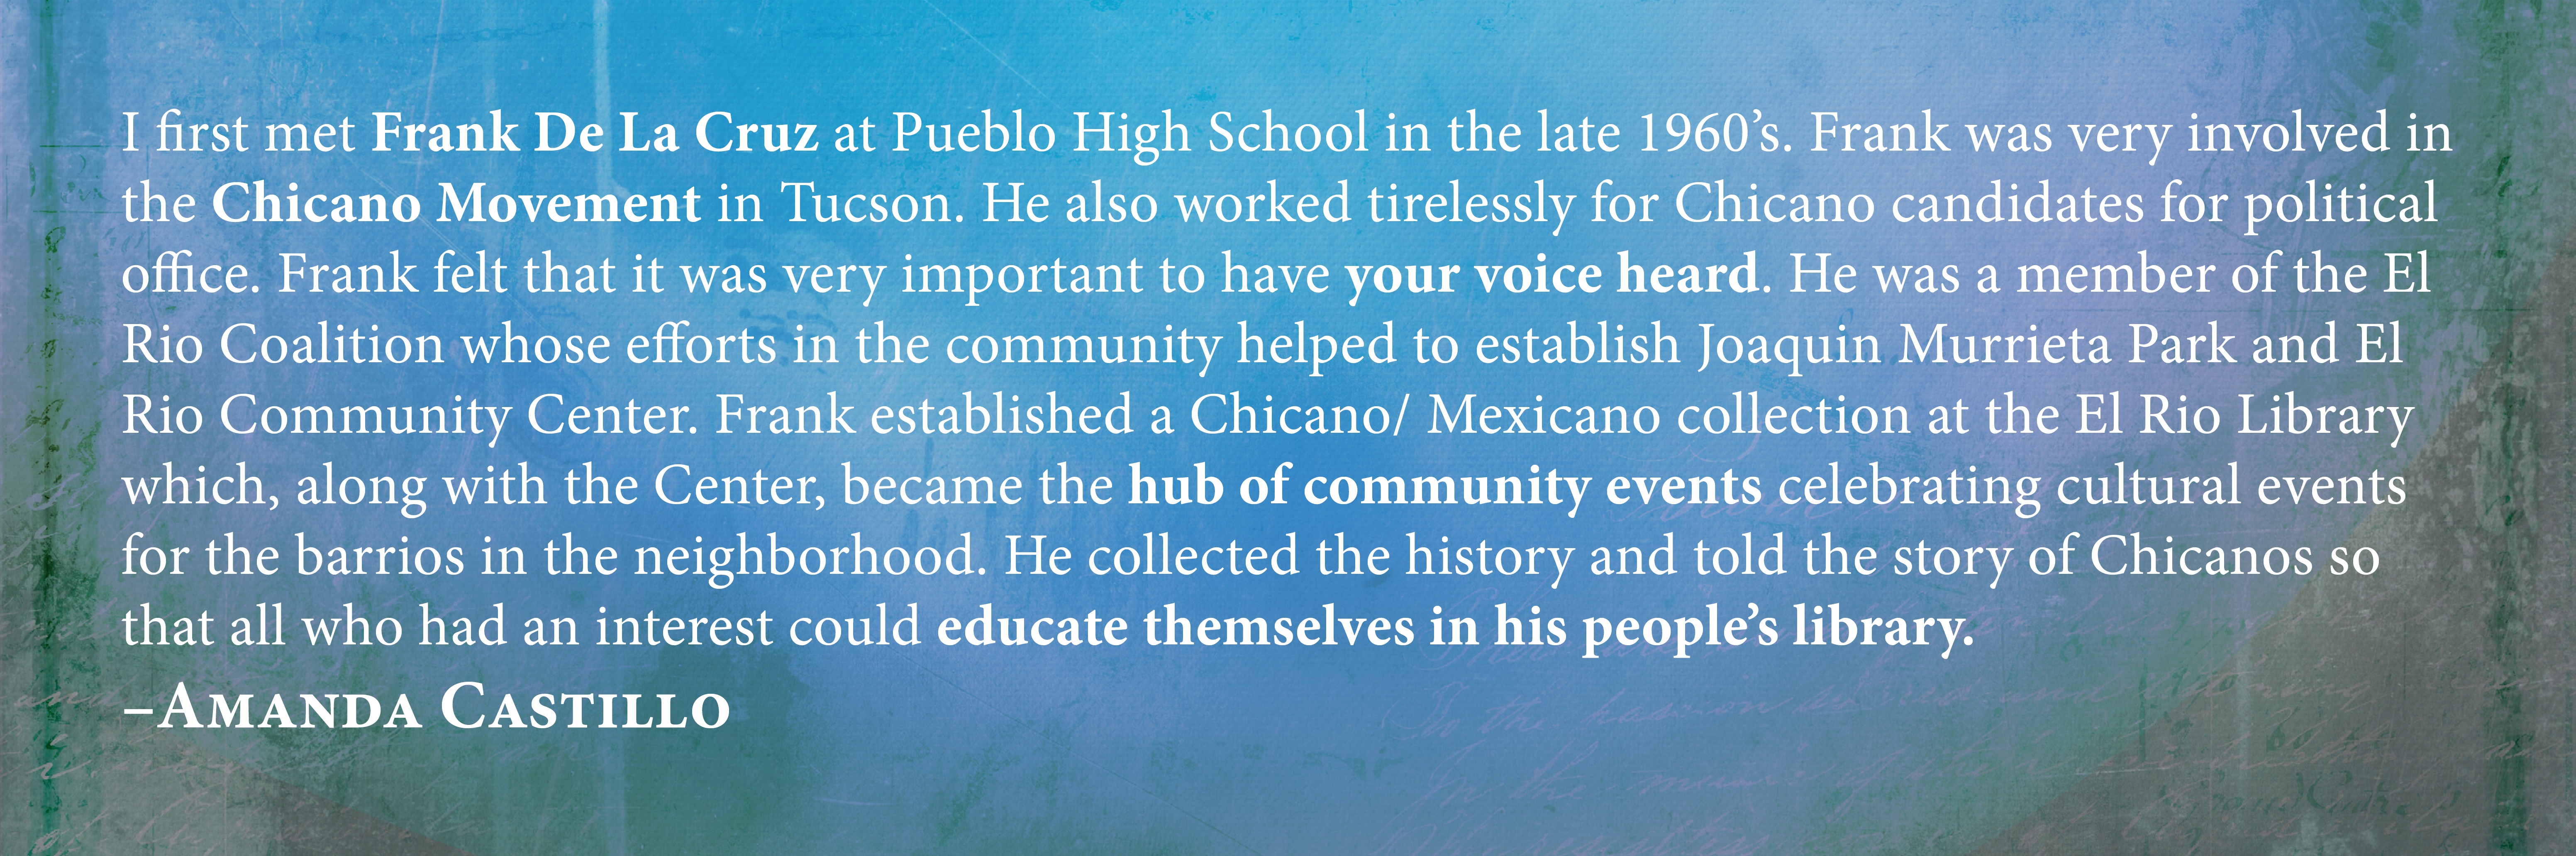 I first met Frank De La Cruz at Pueblo High School in the late 1960’s. Frank was very involved in the Chicano Movement in Tucson. He also worked tirelessly for Chicano candidates for political office. Frank felt that it was very important to have your voice heard. He was a member of the El Rio Coalition whose efforts in the community helped to establish Joaquin Murrieta Park and El Rio Community Center. Frank established a Chicano/ Mexicano collection at the El Rio Library which, along with the Center, became the hub of community events celebrating cultural events for the barrios in the neighborhood. He collected the history and told the story of Chicanos so that all who had an interest could educate themselves in his people’s library. Amanda Castillo